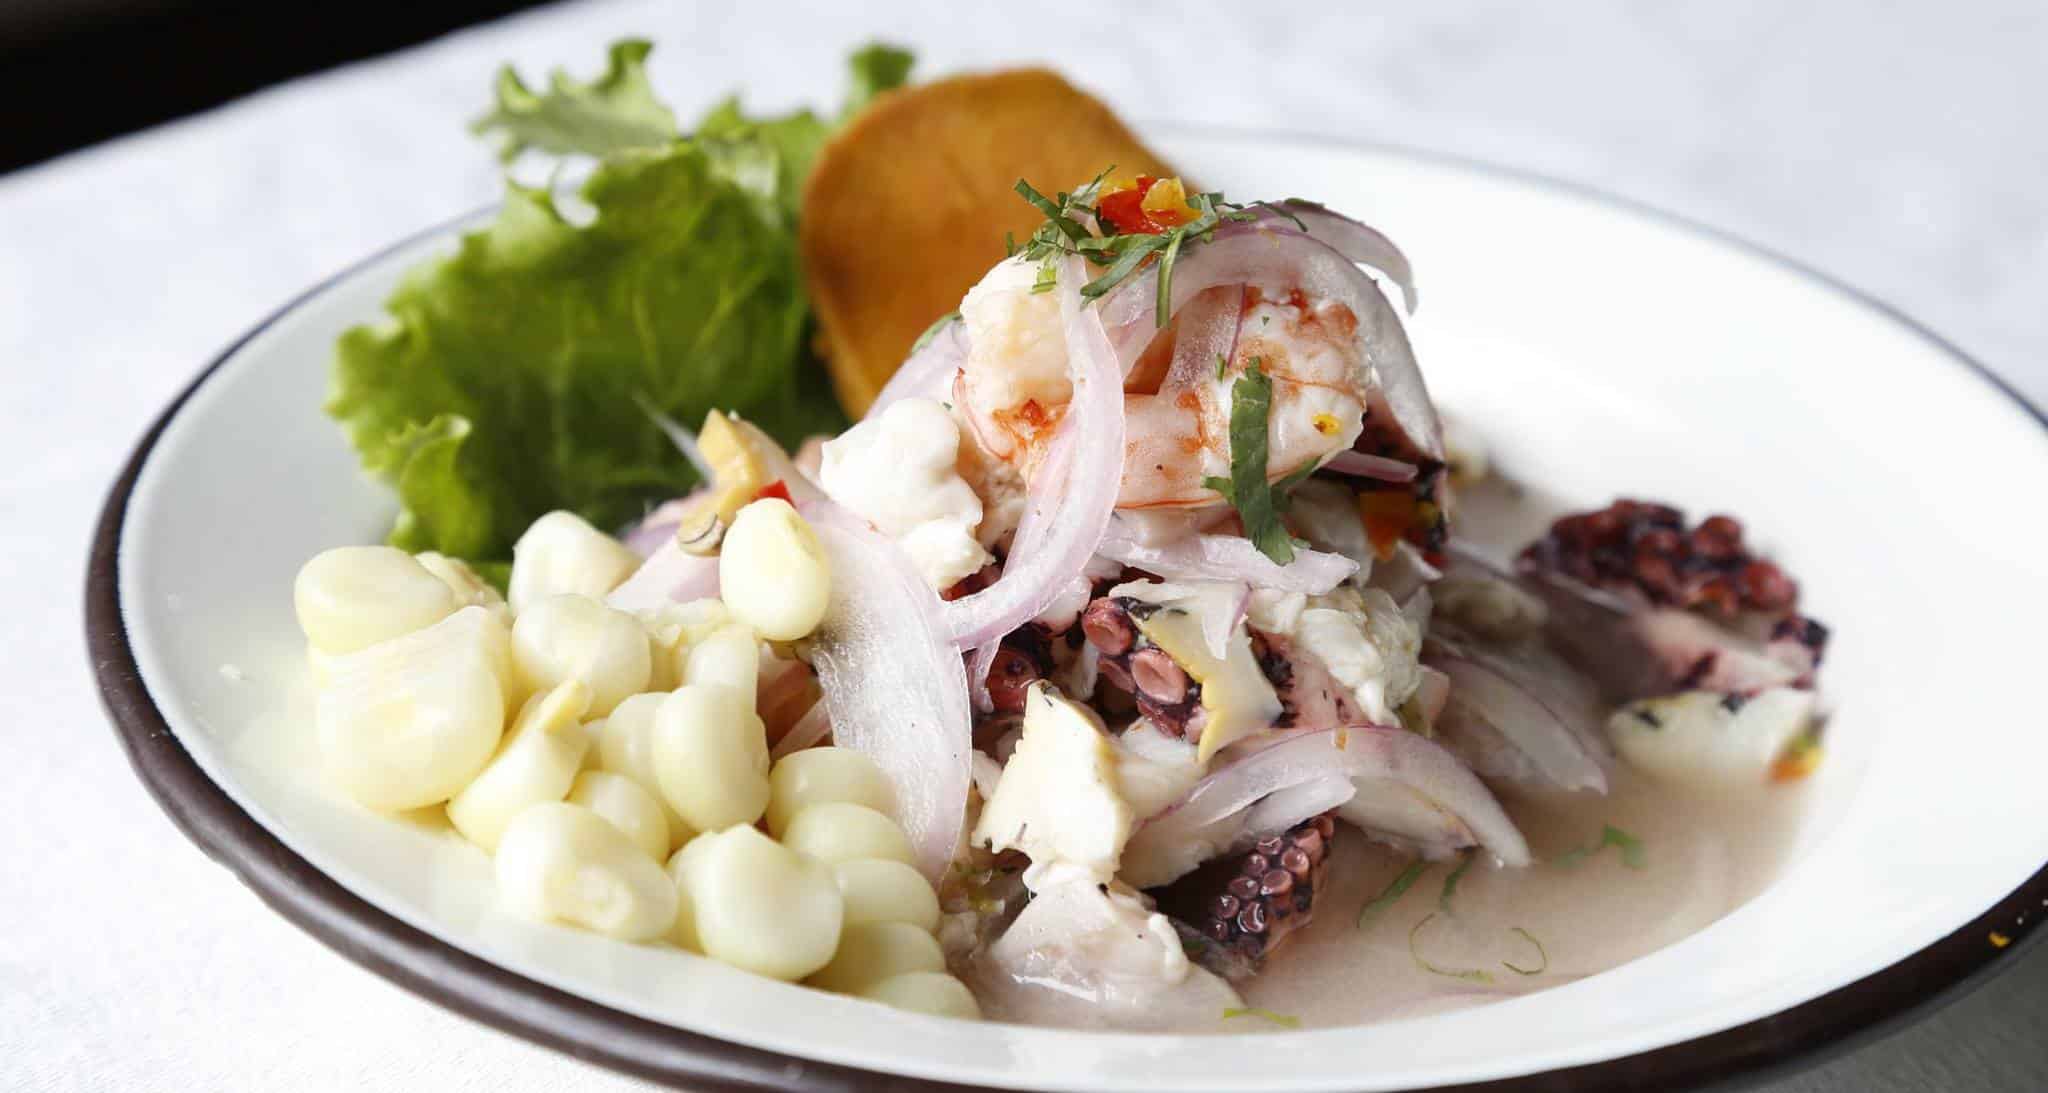 Where to Eat Ceviche in Lima